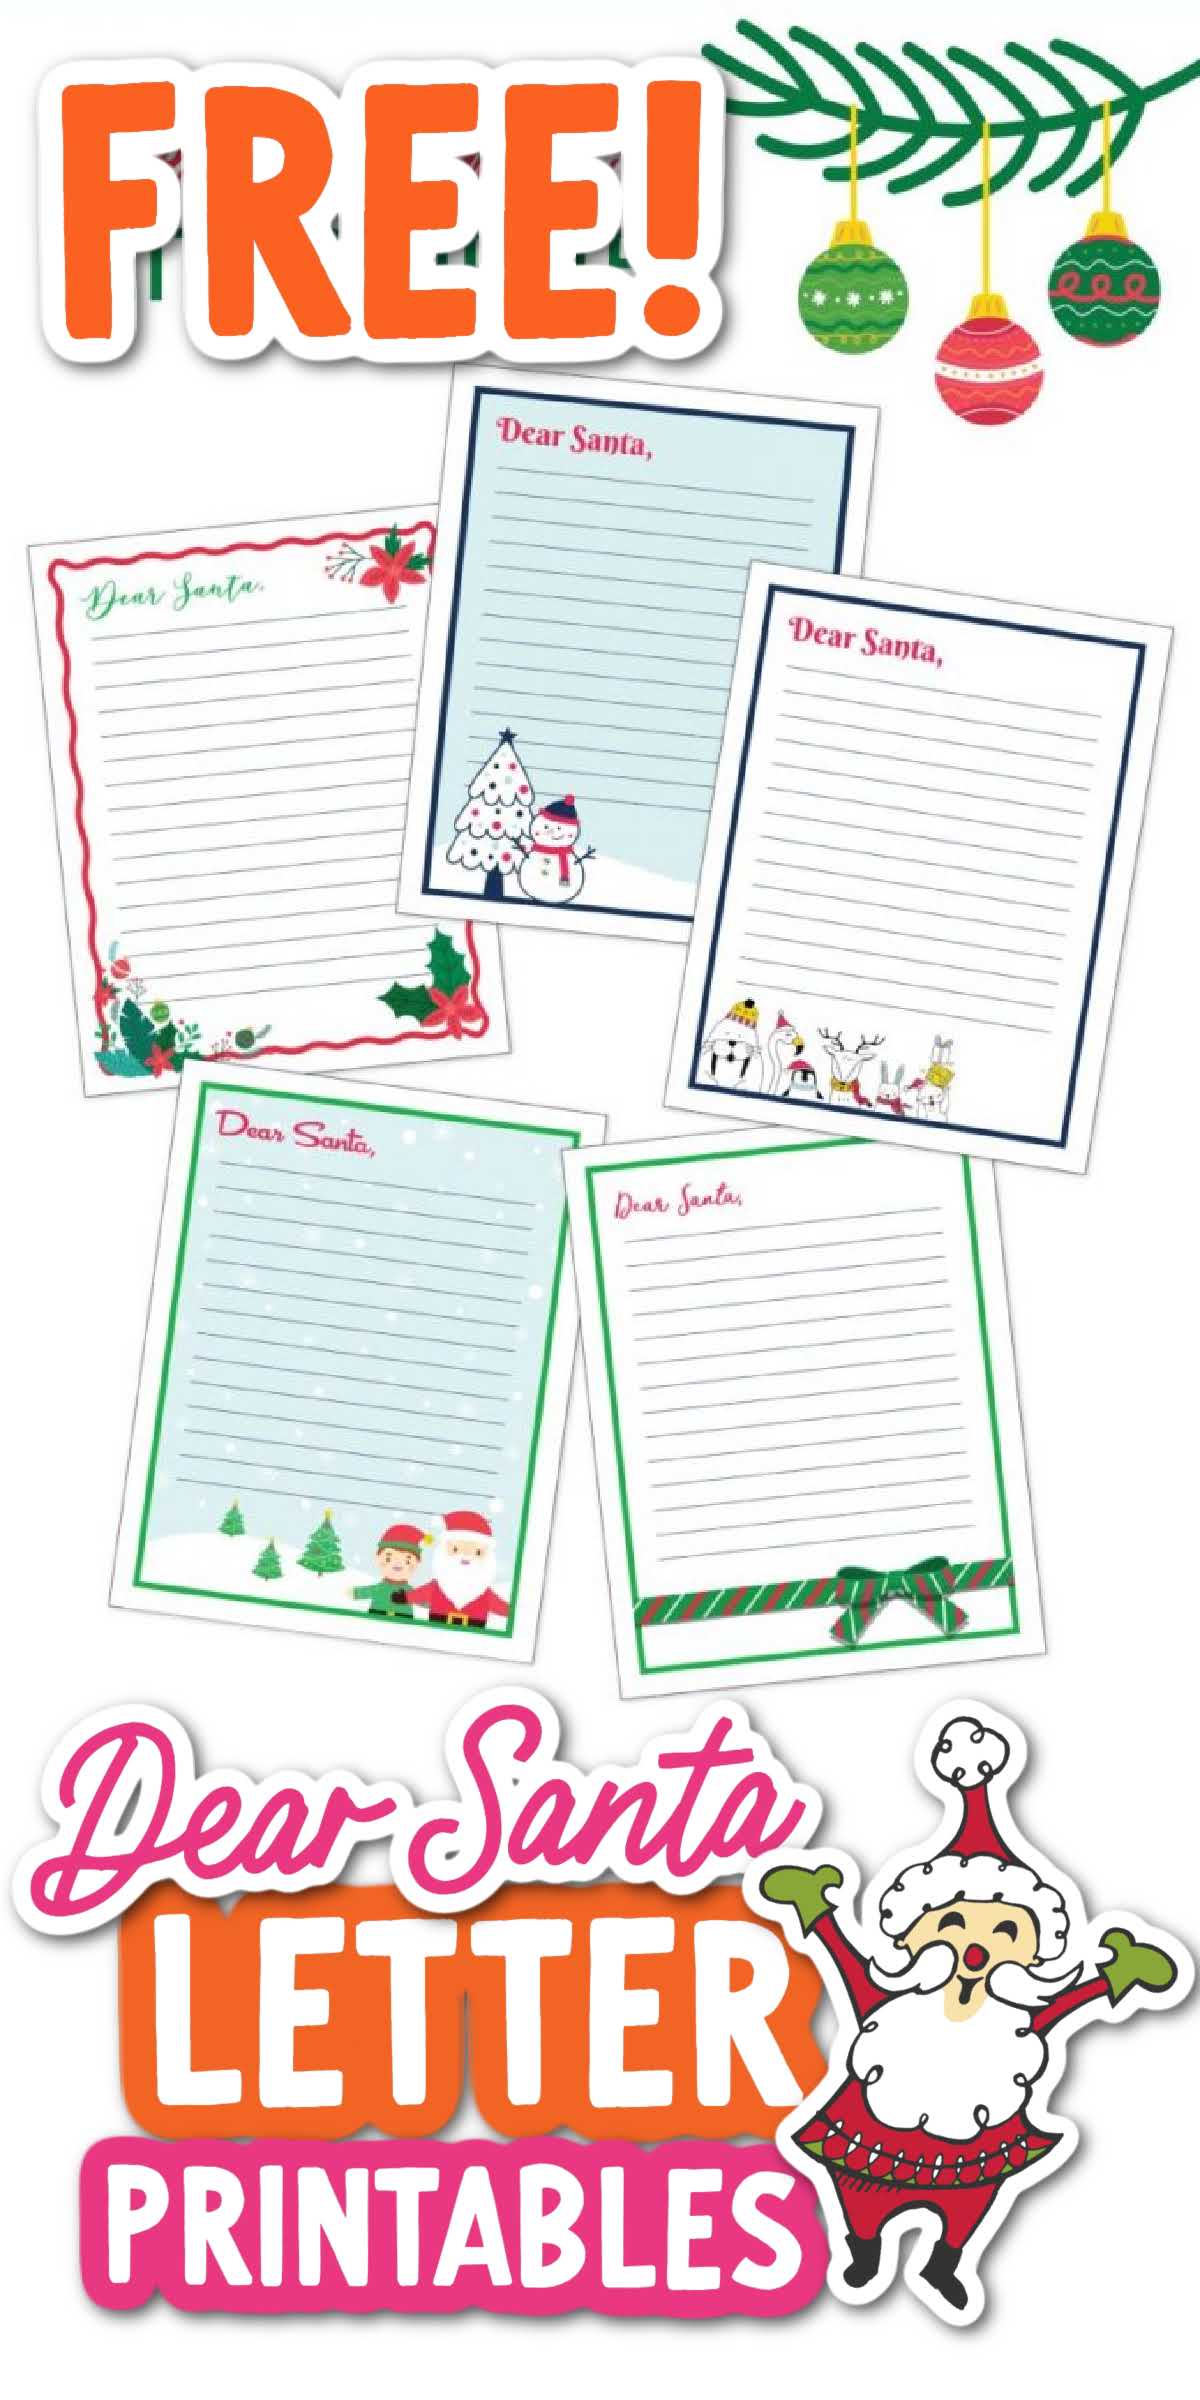 Free Printable Letters To Santa Templates - Spaceships and Laser Beams